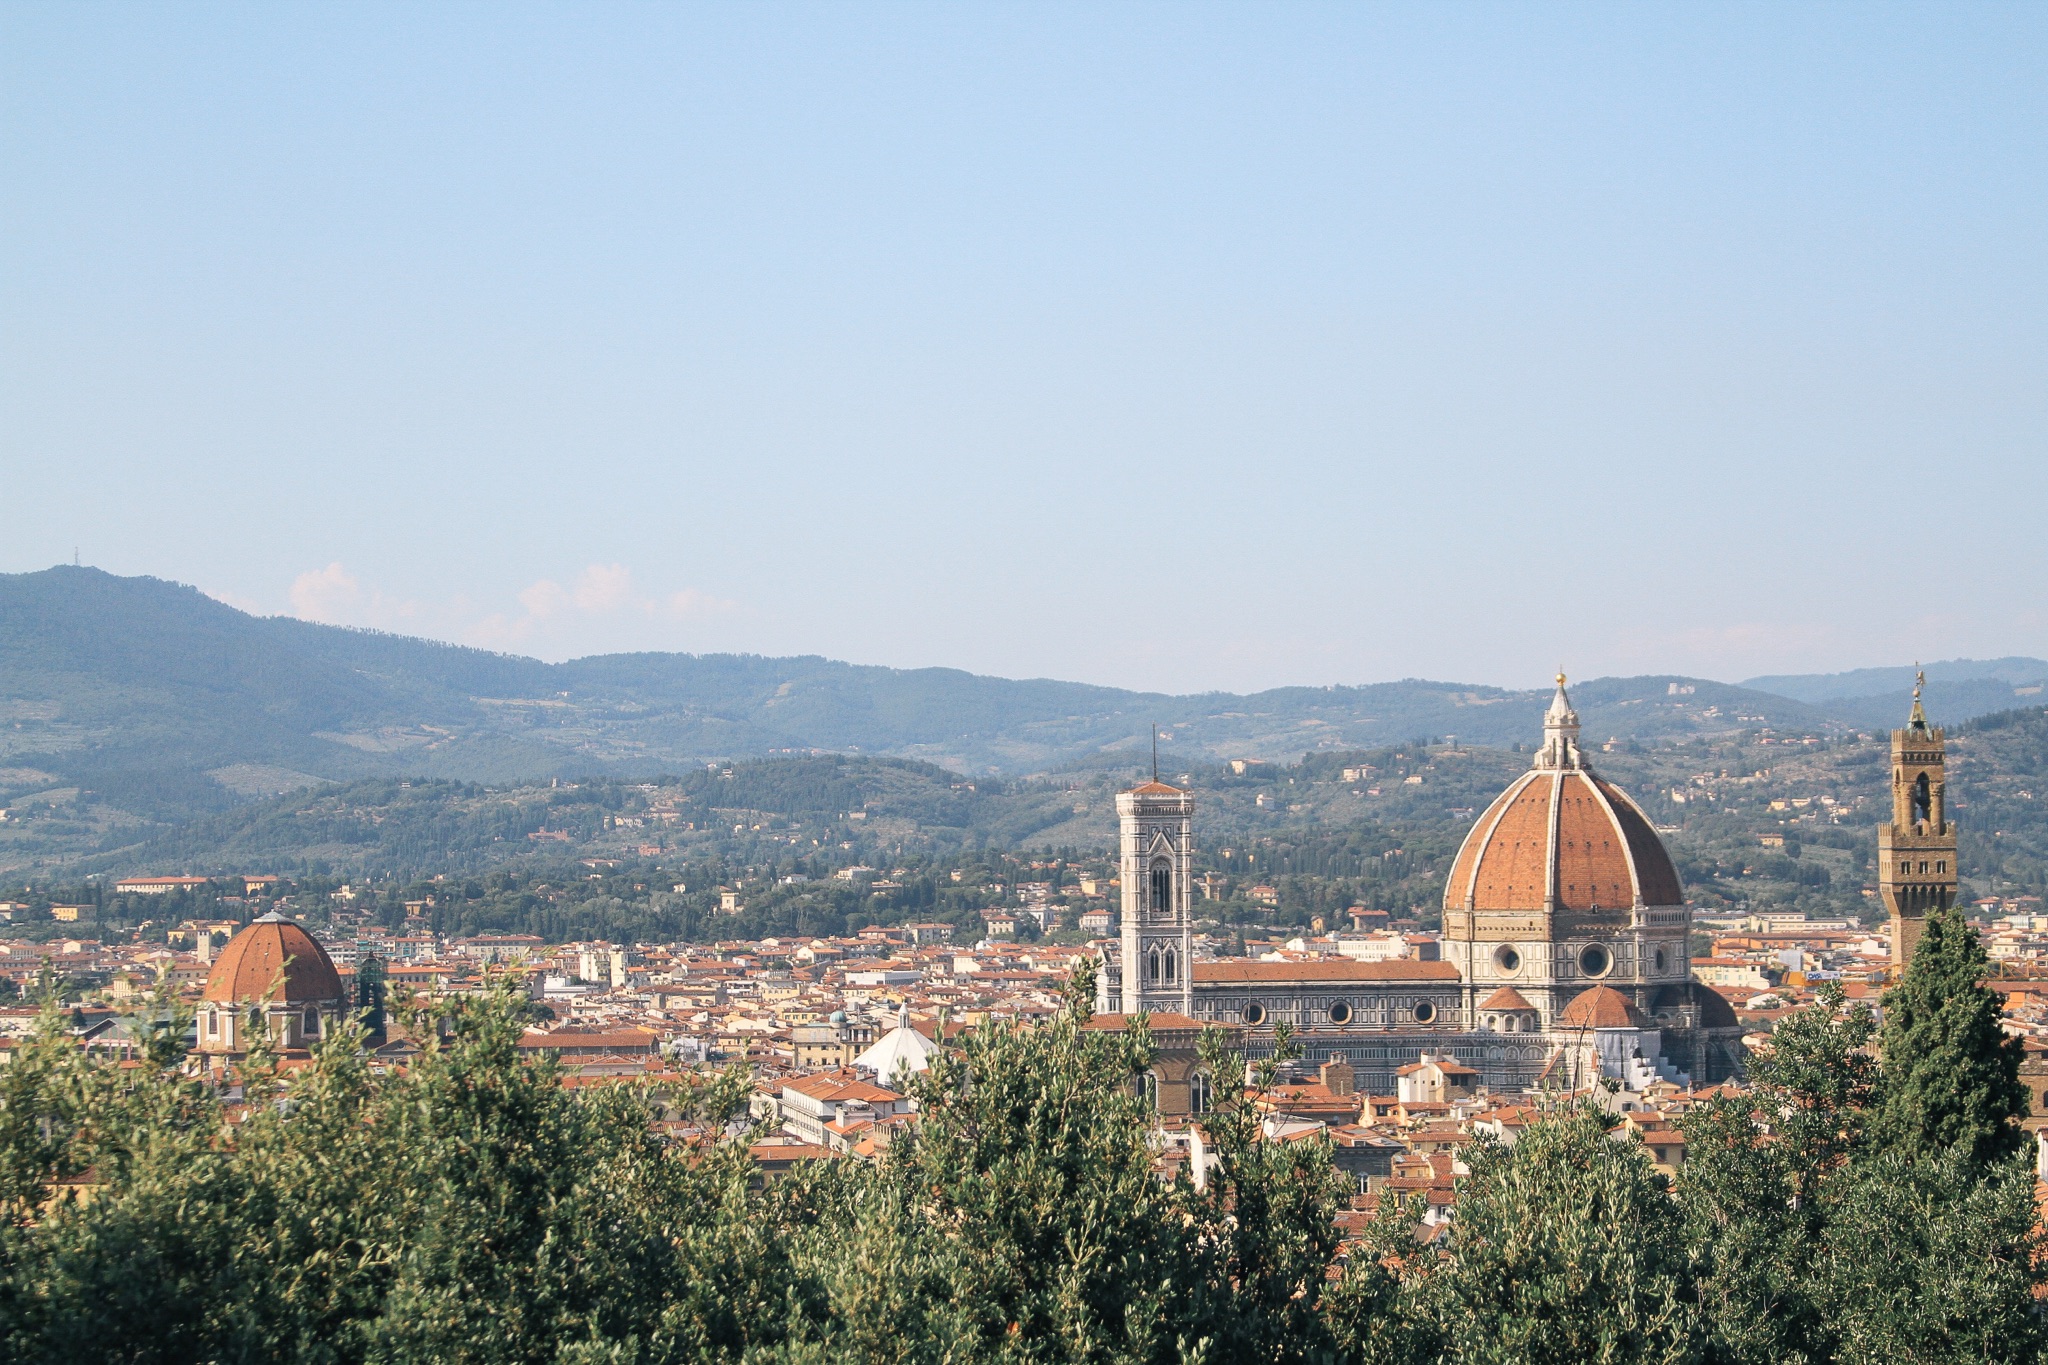 How to Plan Your Itinerary in Florence | Florence, Italy is one of the friendliest cities in the world. Here are the best things to do and places to go, from restaurants and views to Tuscany day trips. Use any ideas you like, then mix and match them…